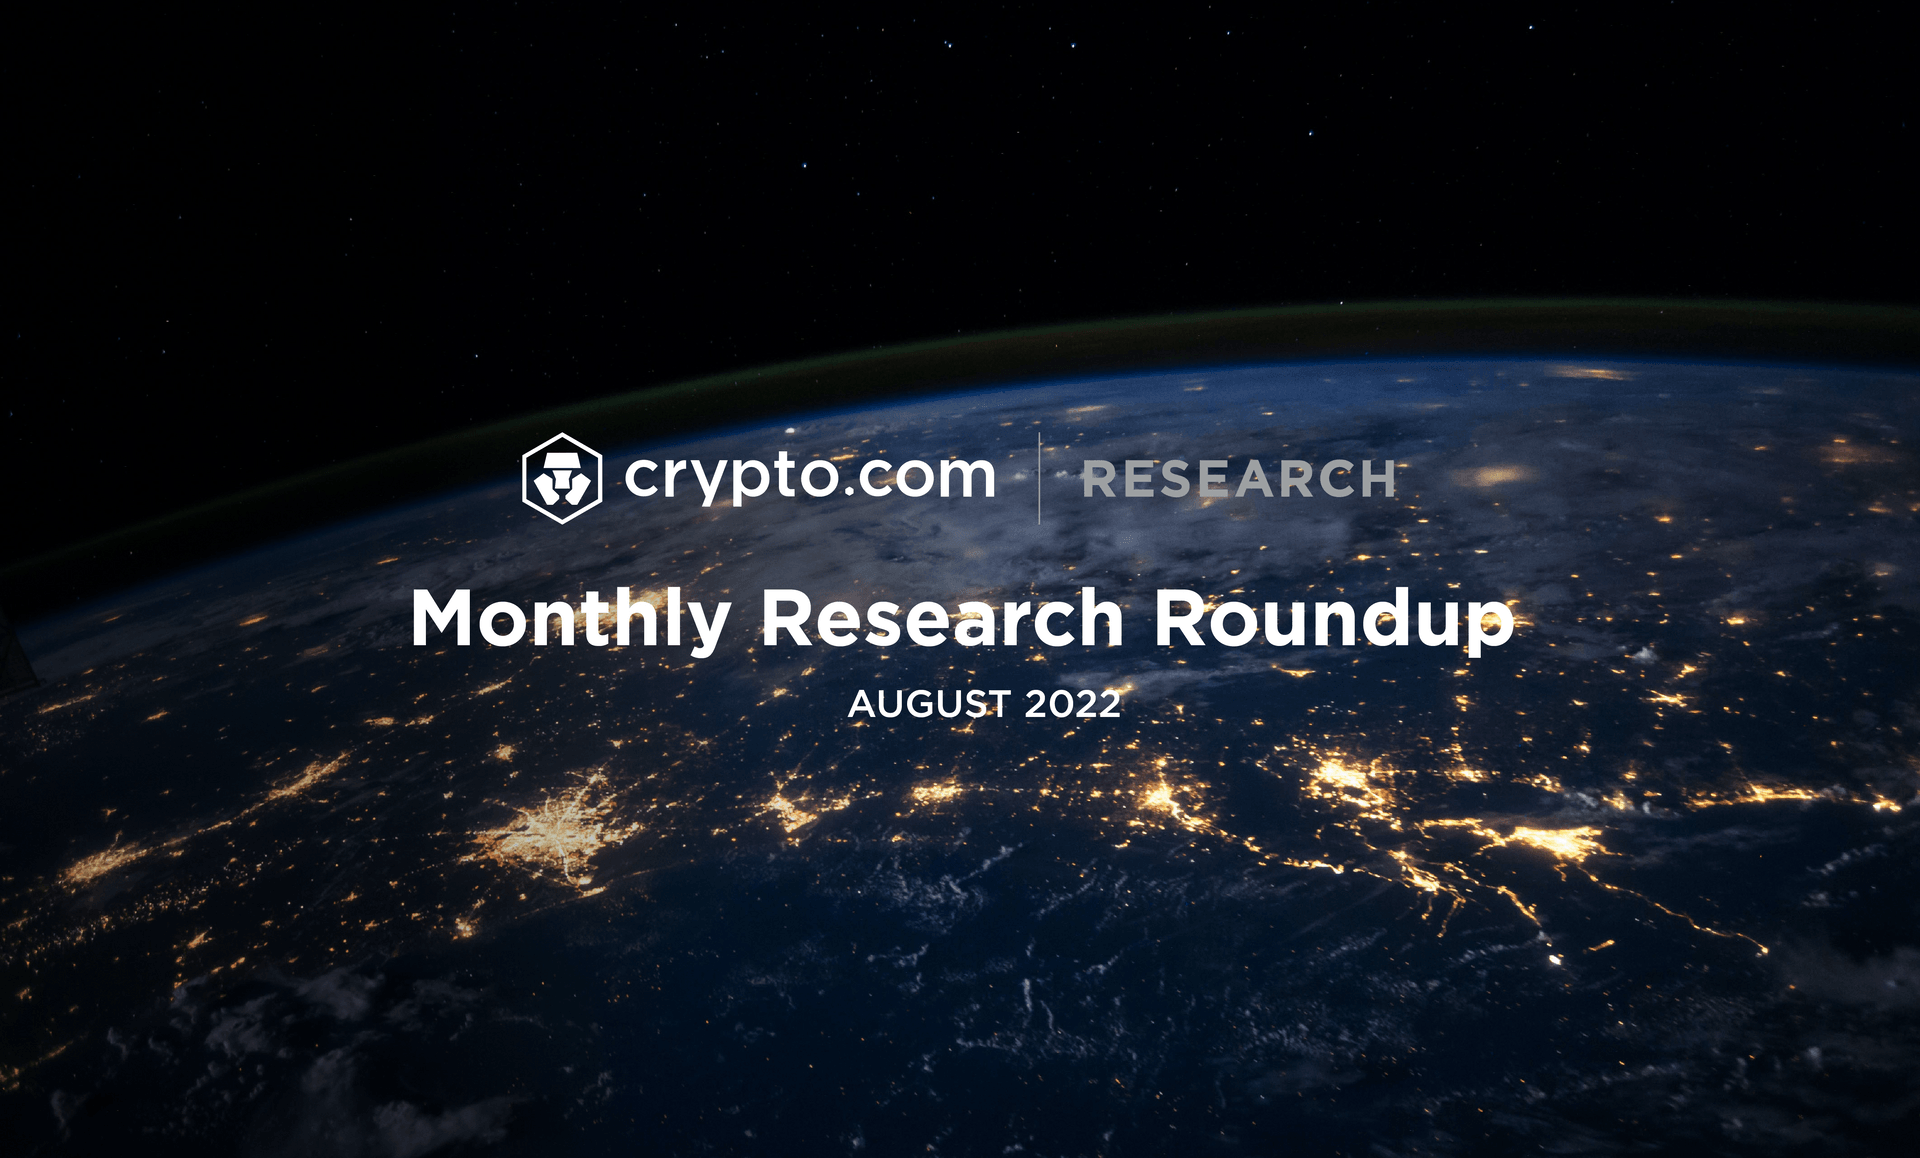 Crypto.com Monthly Research Roundup Newsletter